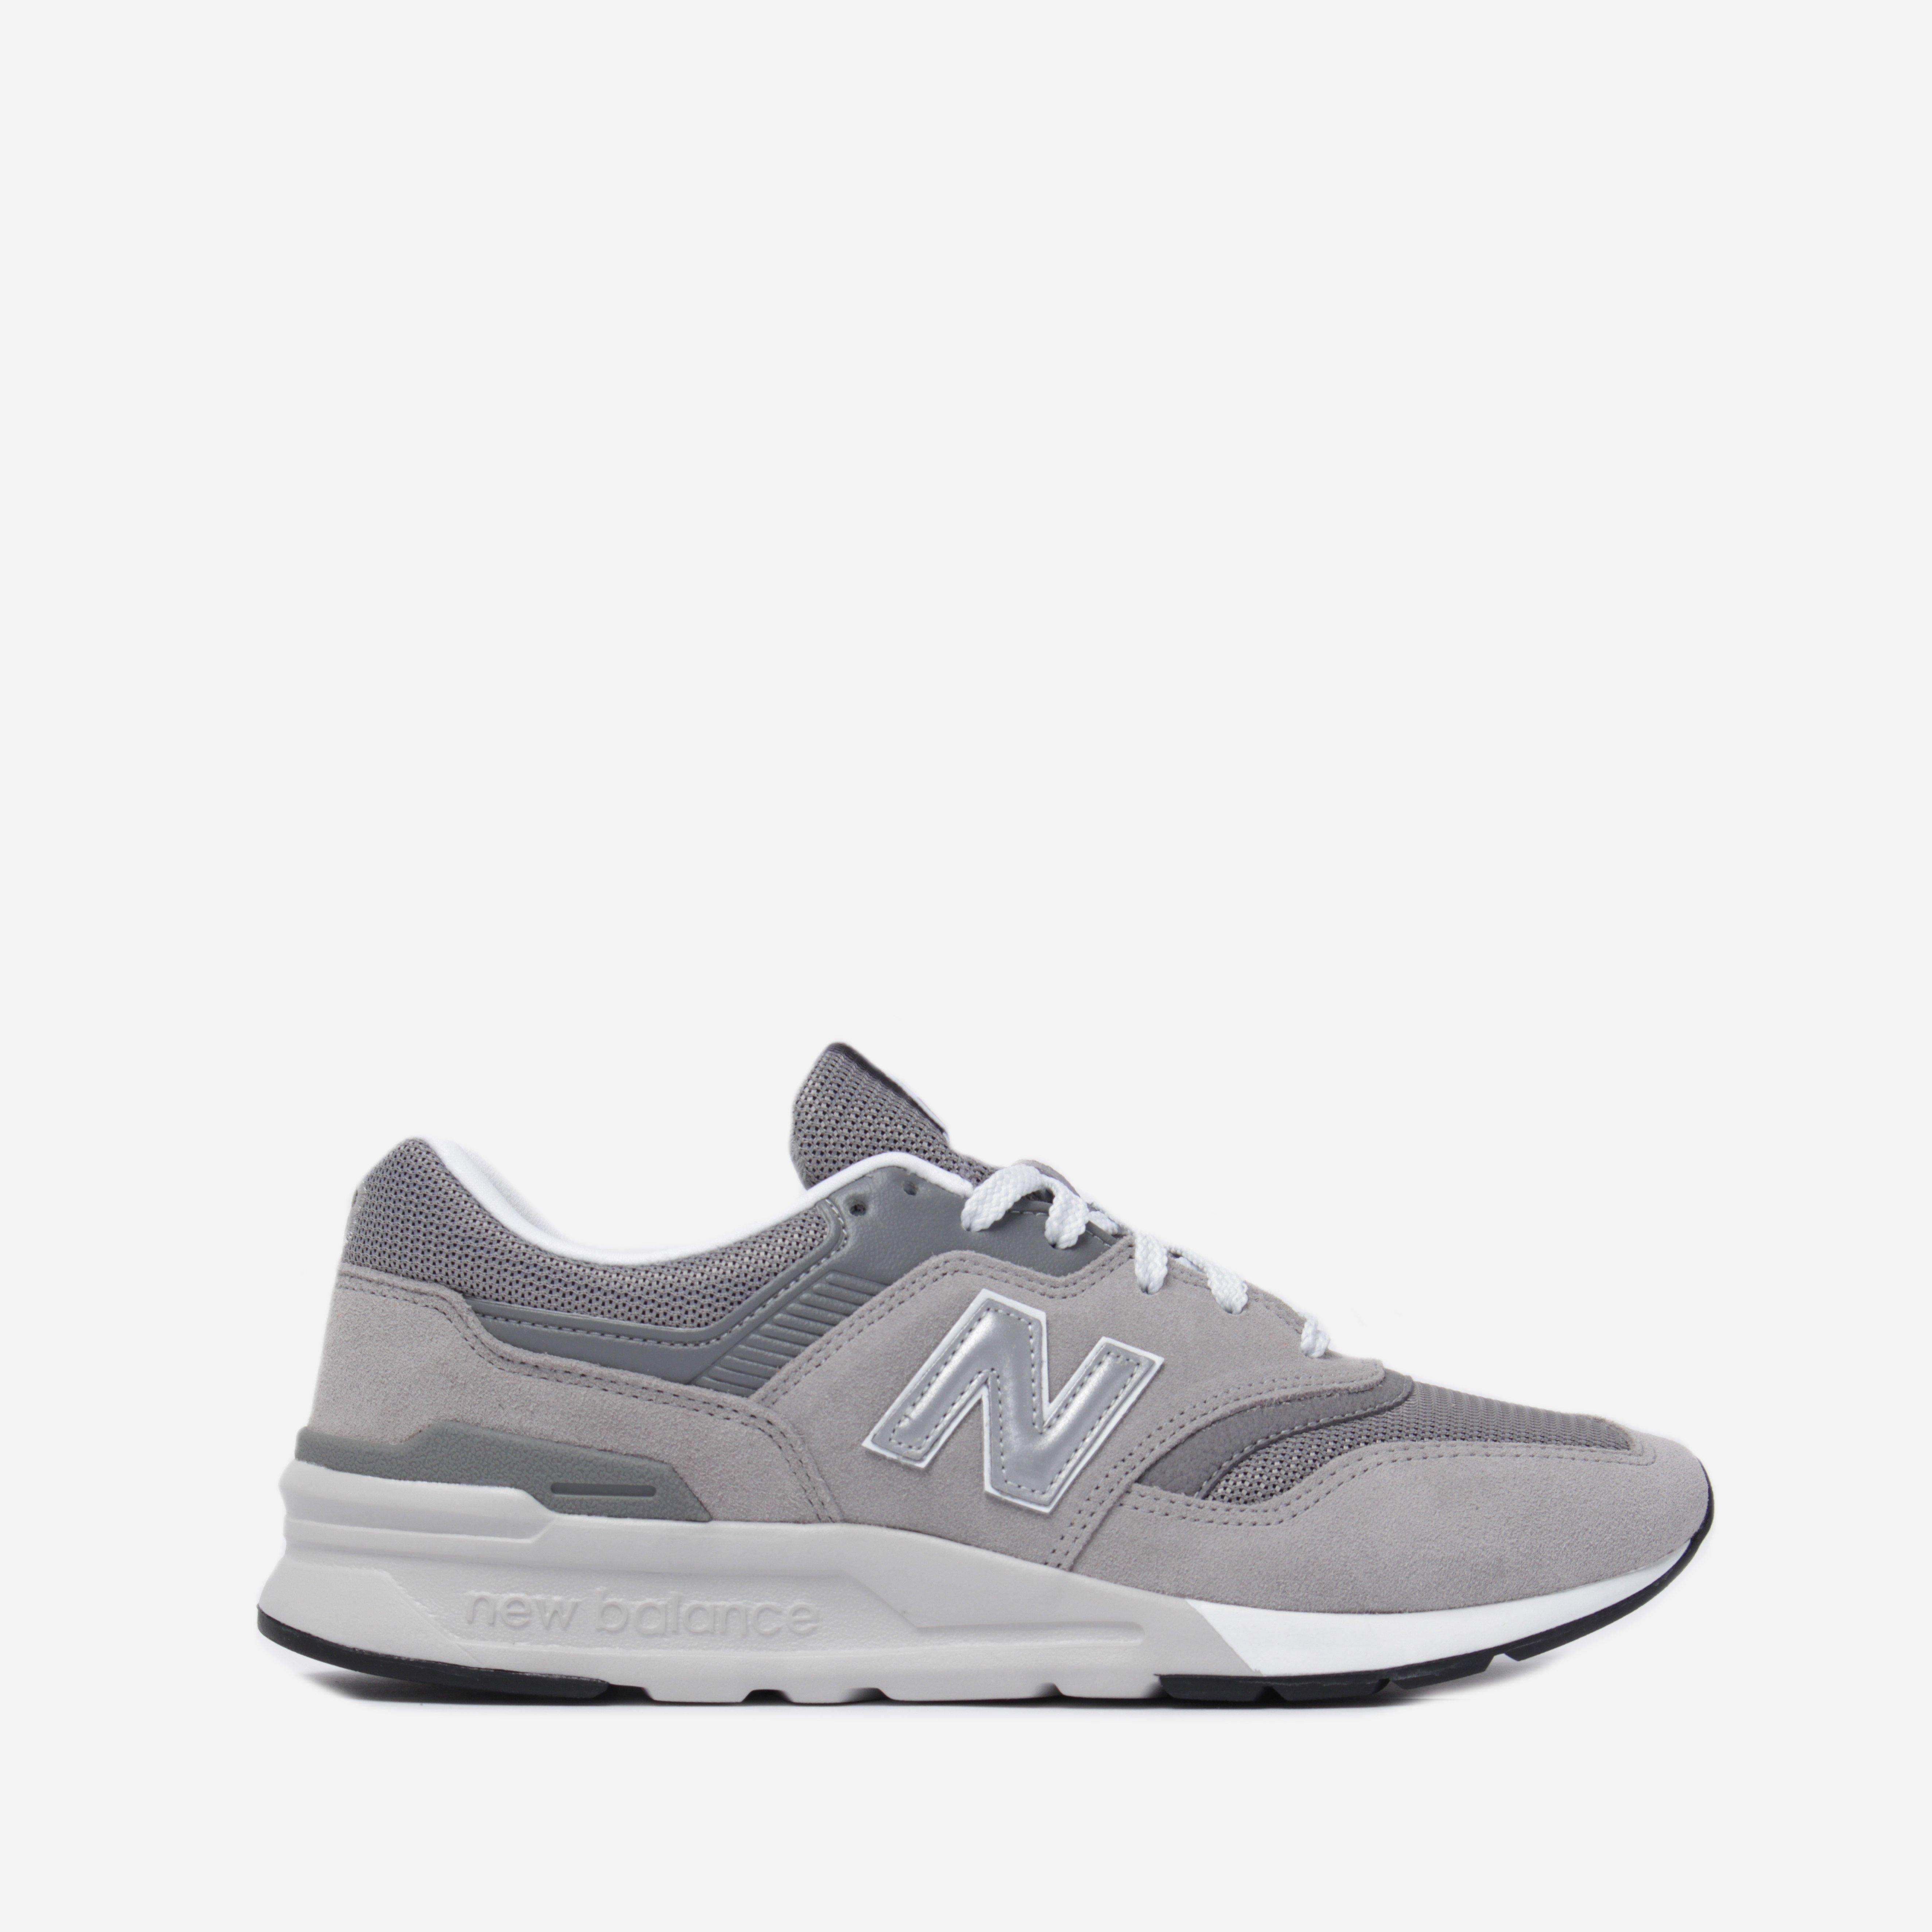 New Balance 997 in Grey (Gray) for Men - Save 6% - Lyst